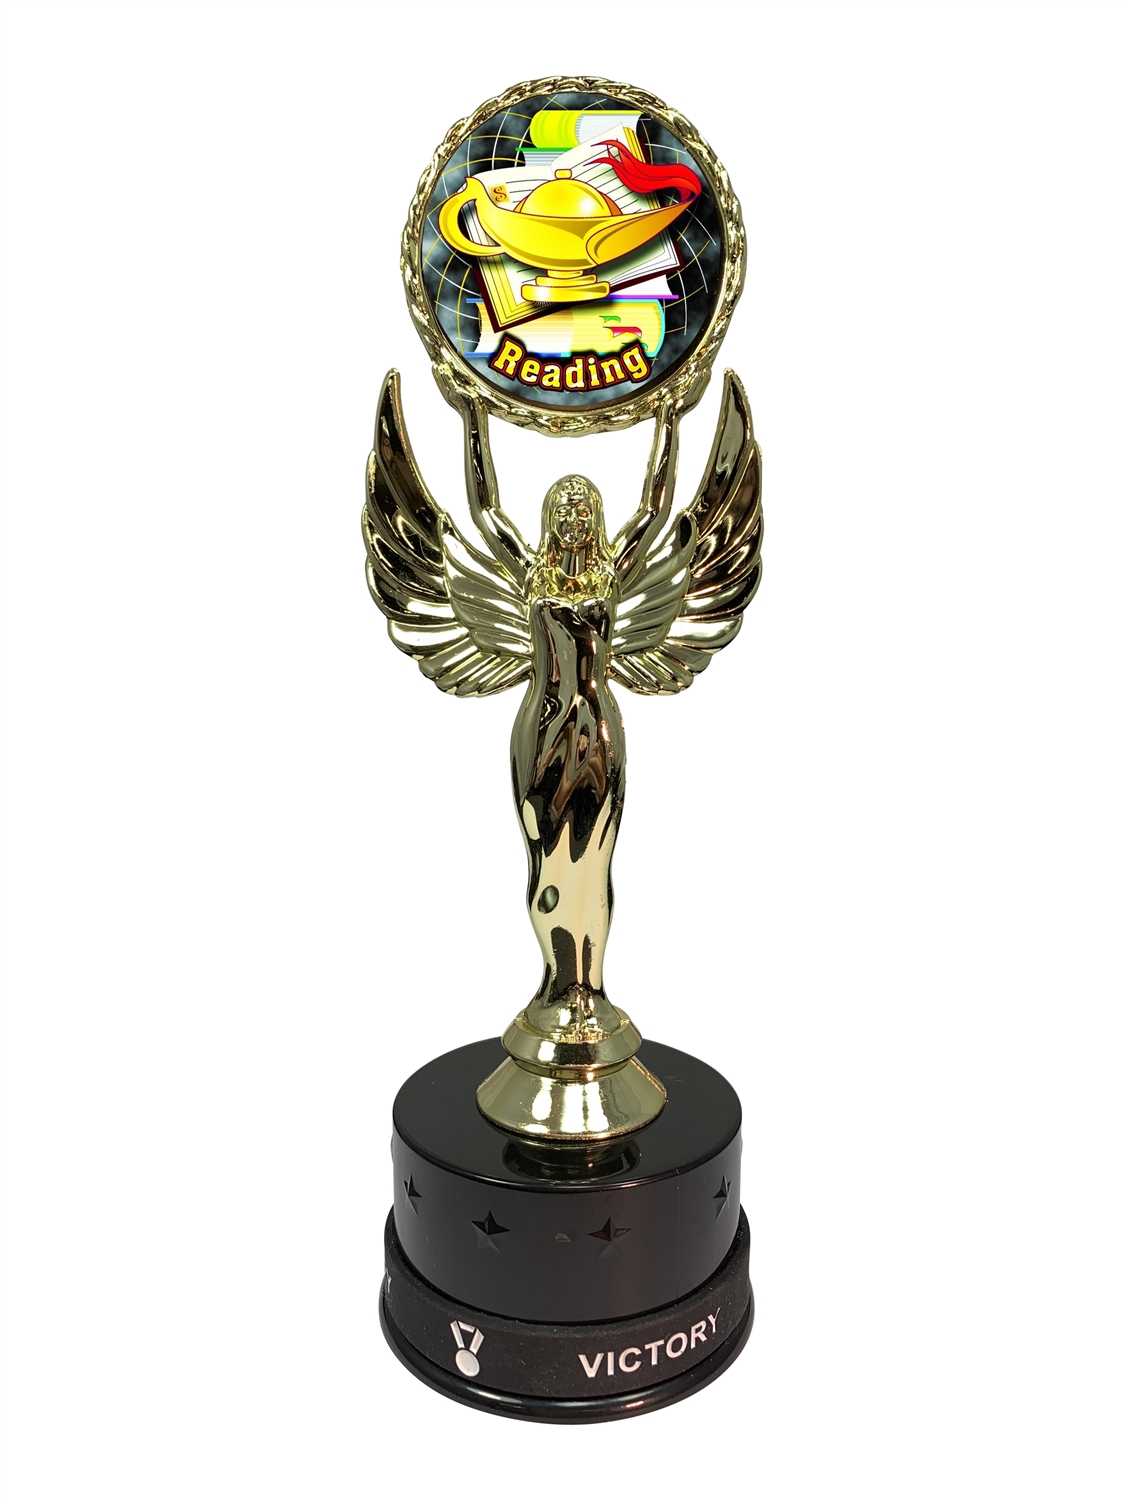 Home School Reading Victory Wristband Trophy